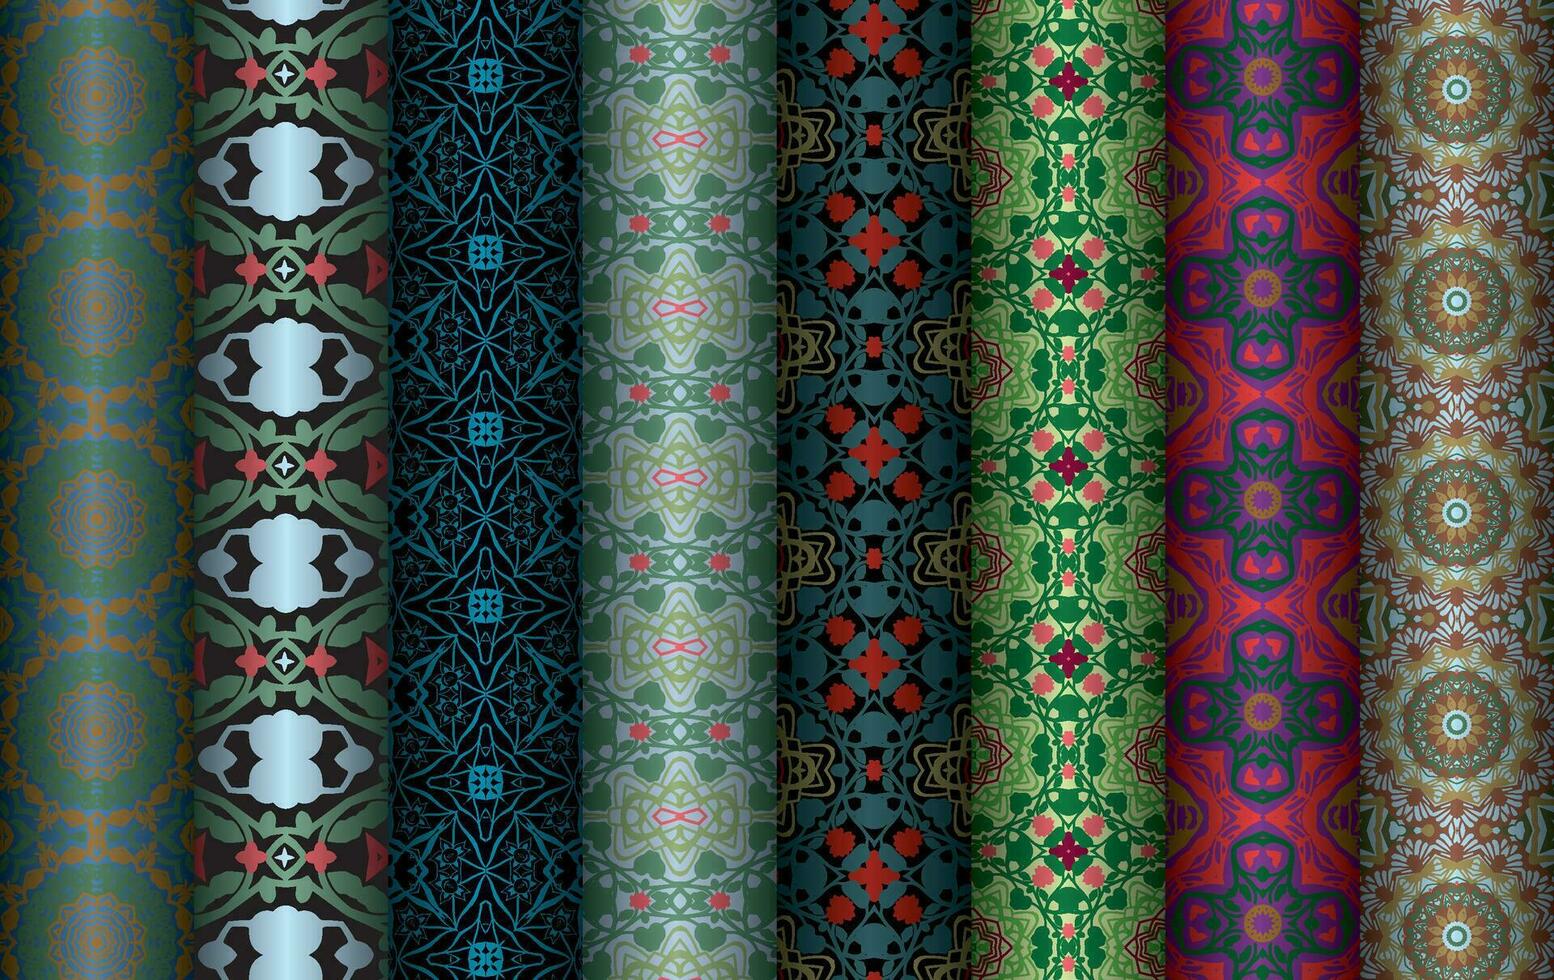 https://static.vecteezy.com/system/resources/previews/026/066/506/non_2x/colorful-fabric-design-set-of-modern-vintage-red-blue-black-repeated-pattern-for-allover-print-and-textile-industry-collection-of-geometric-repeated-patterns-design-bundle-fabric-texture-background-vector.jpg